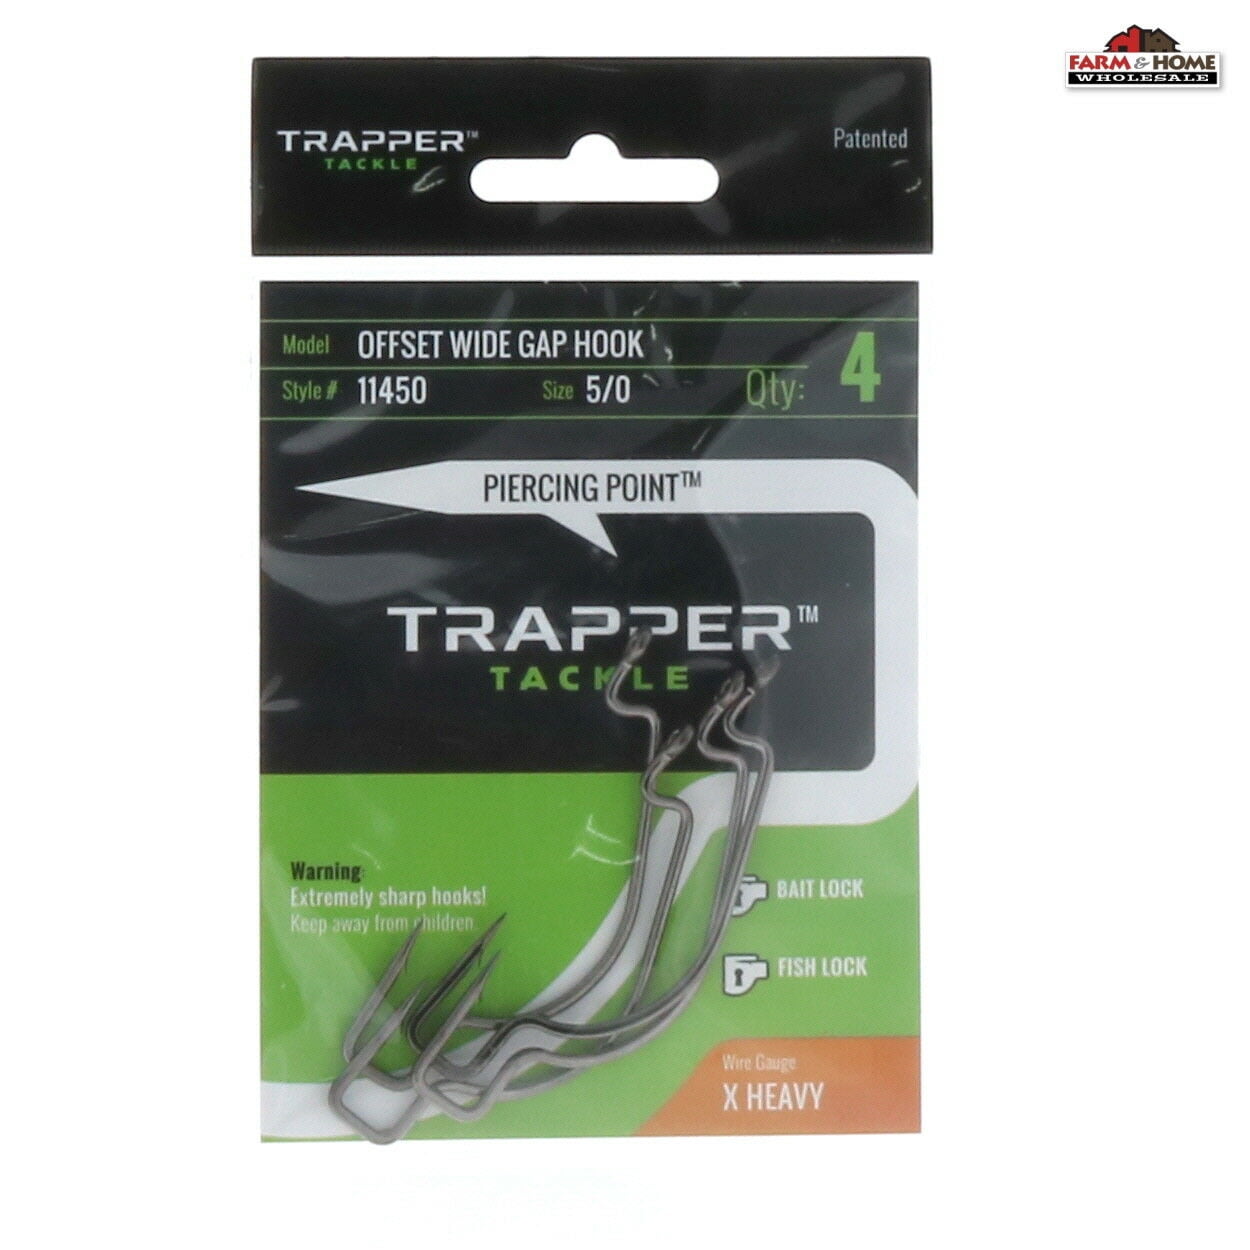 Trapper Tackle X-Heavy Offset Wide Gap Hook Bass & Pike Fishing Tackle Hooks 